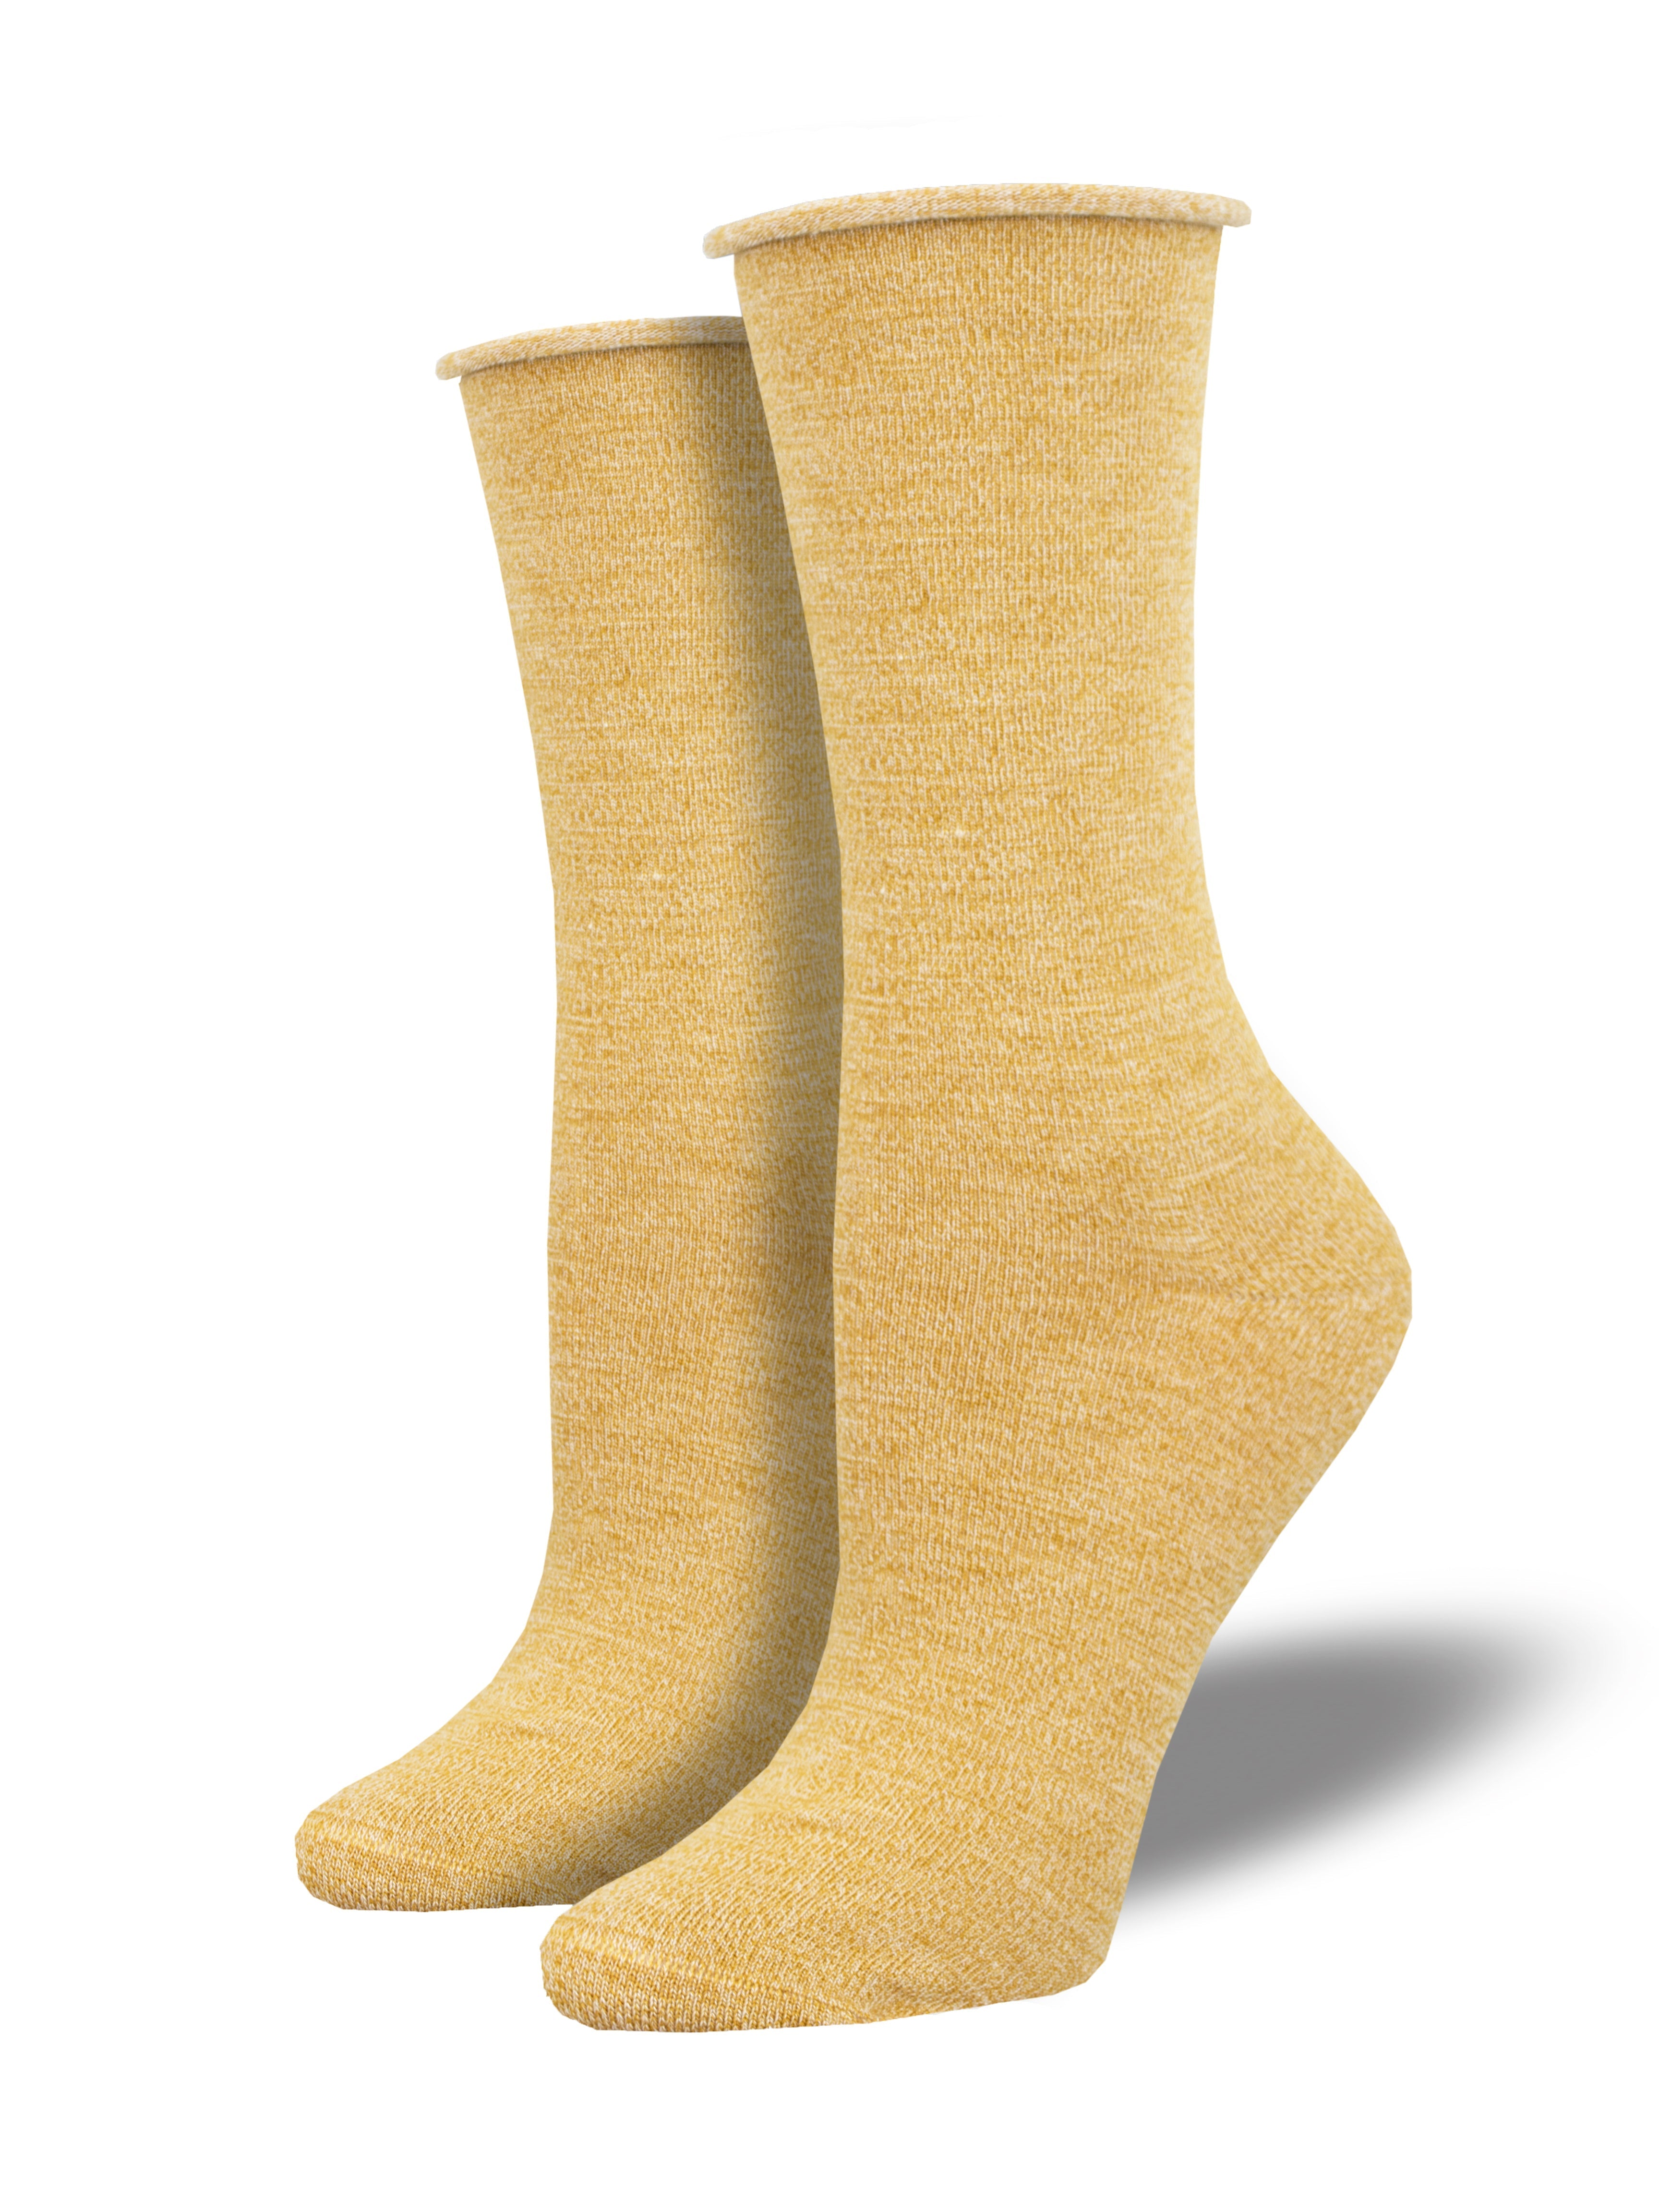 Women's Bamboo "Solid" Roll Top Socks